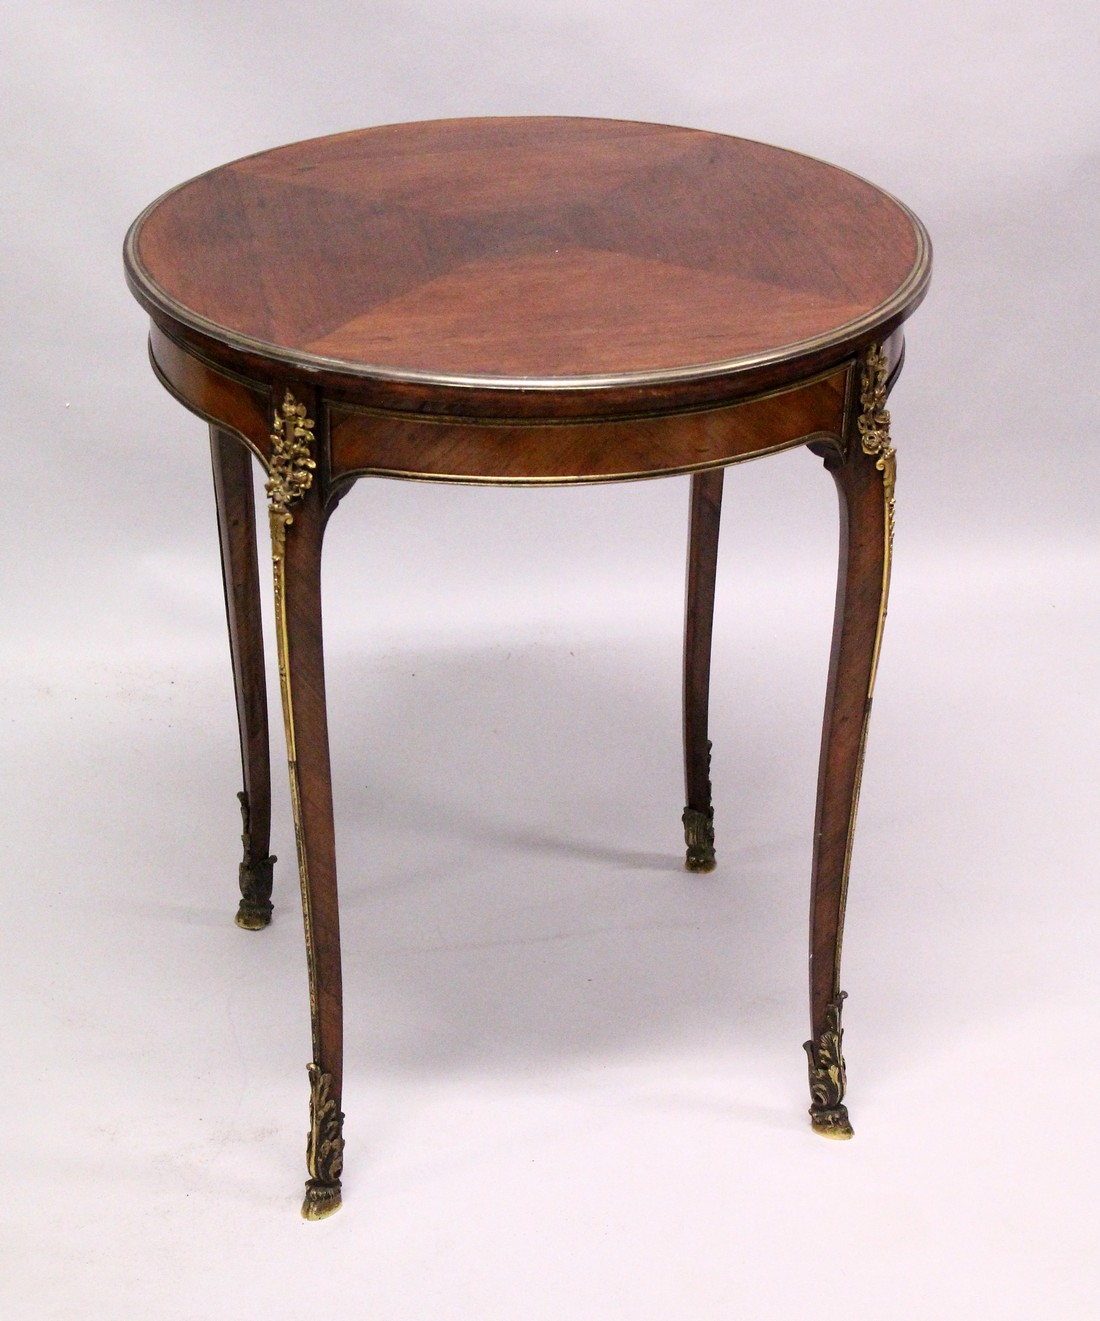 A GOOD LATE 19TH CENTURY FRENCH KINGWOOD AND ORMOLU CIRCULAR GUERIDON, in the Manner of LINKE,